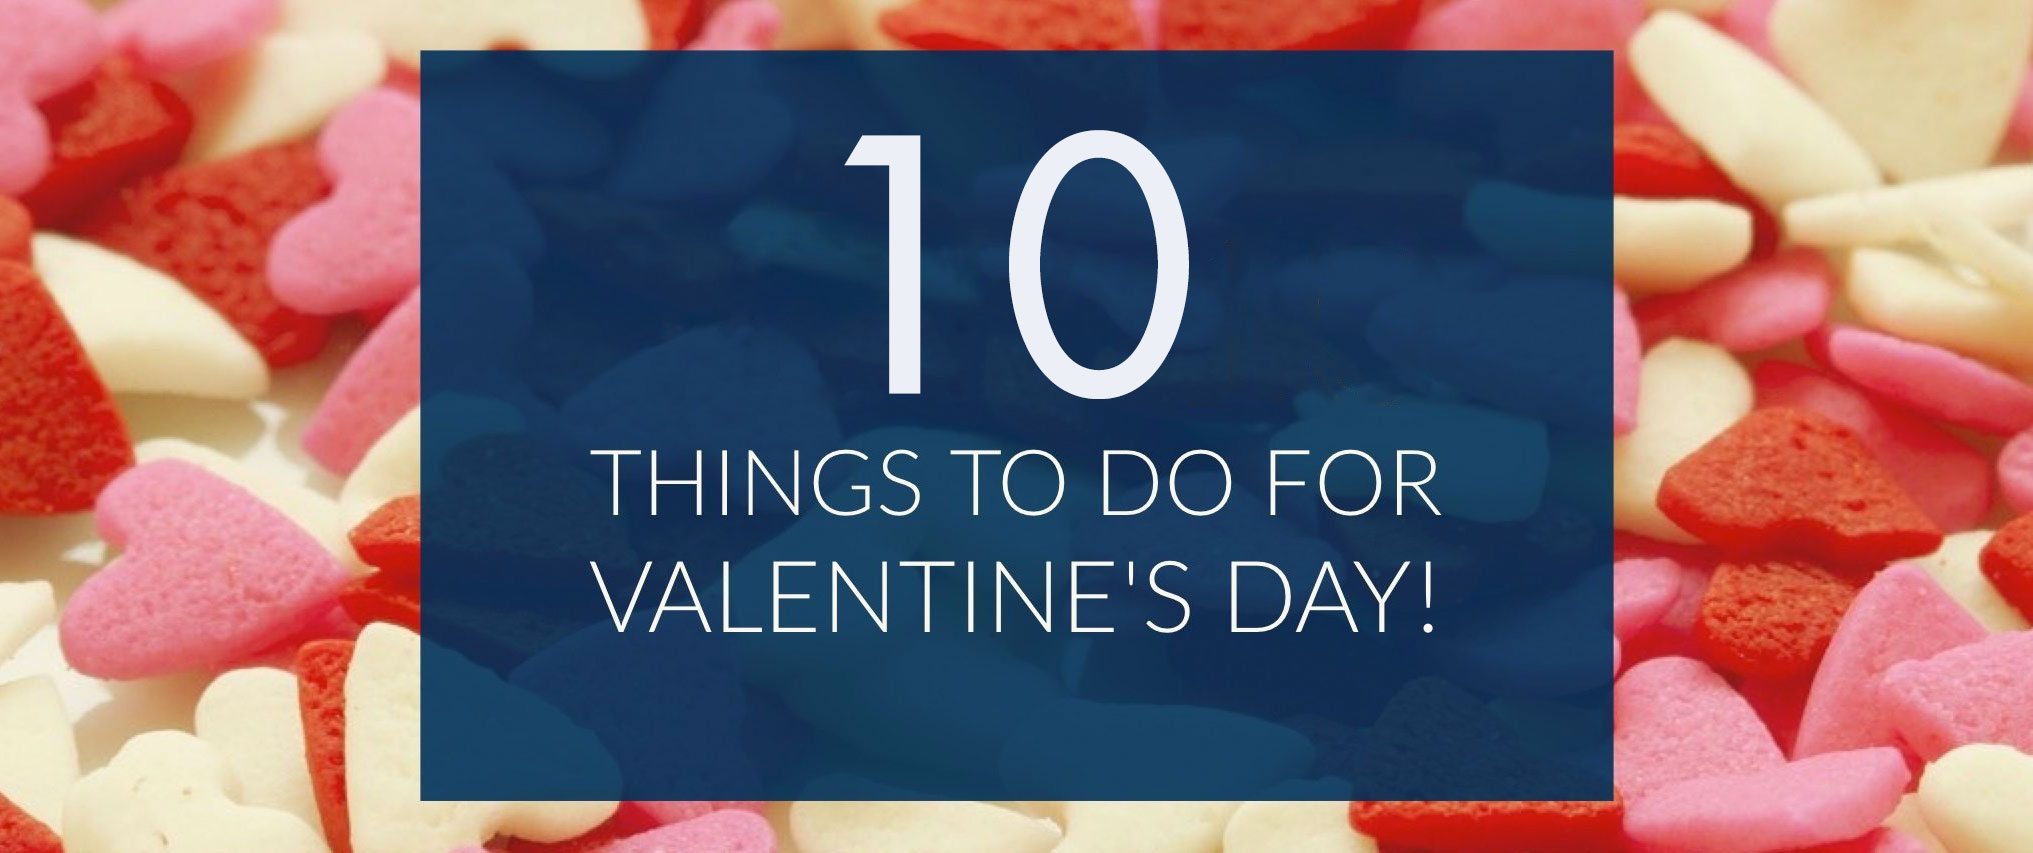 10 Things To Do For Valentine's Day - Charlotte Home Finder